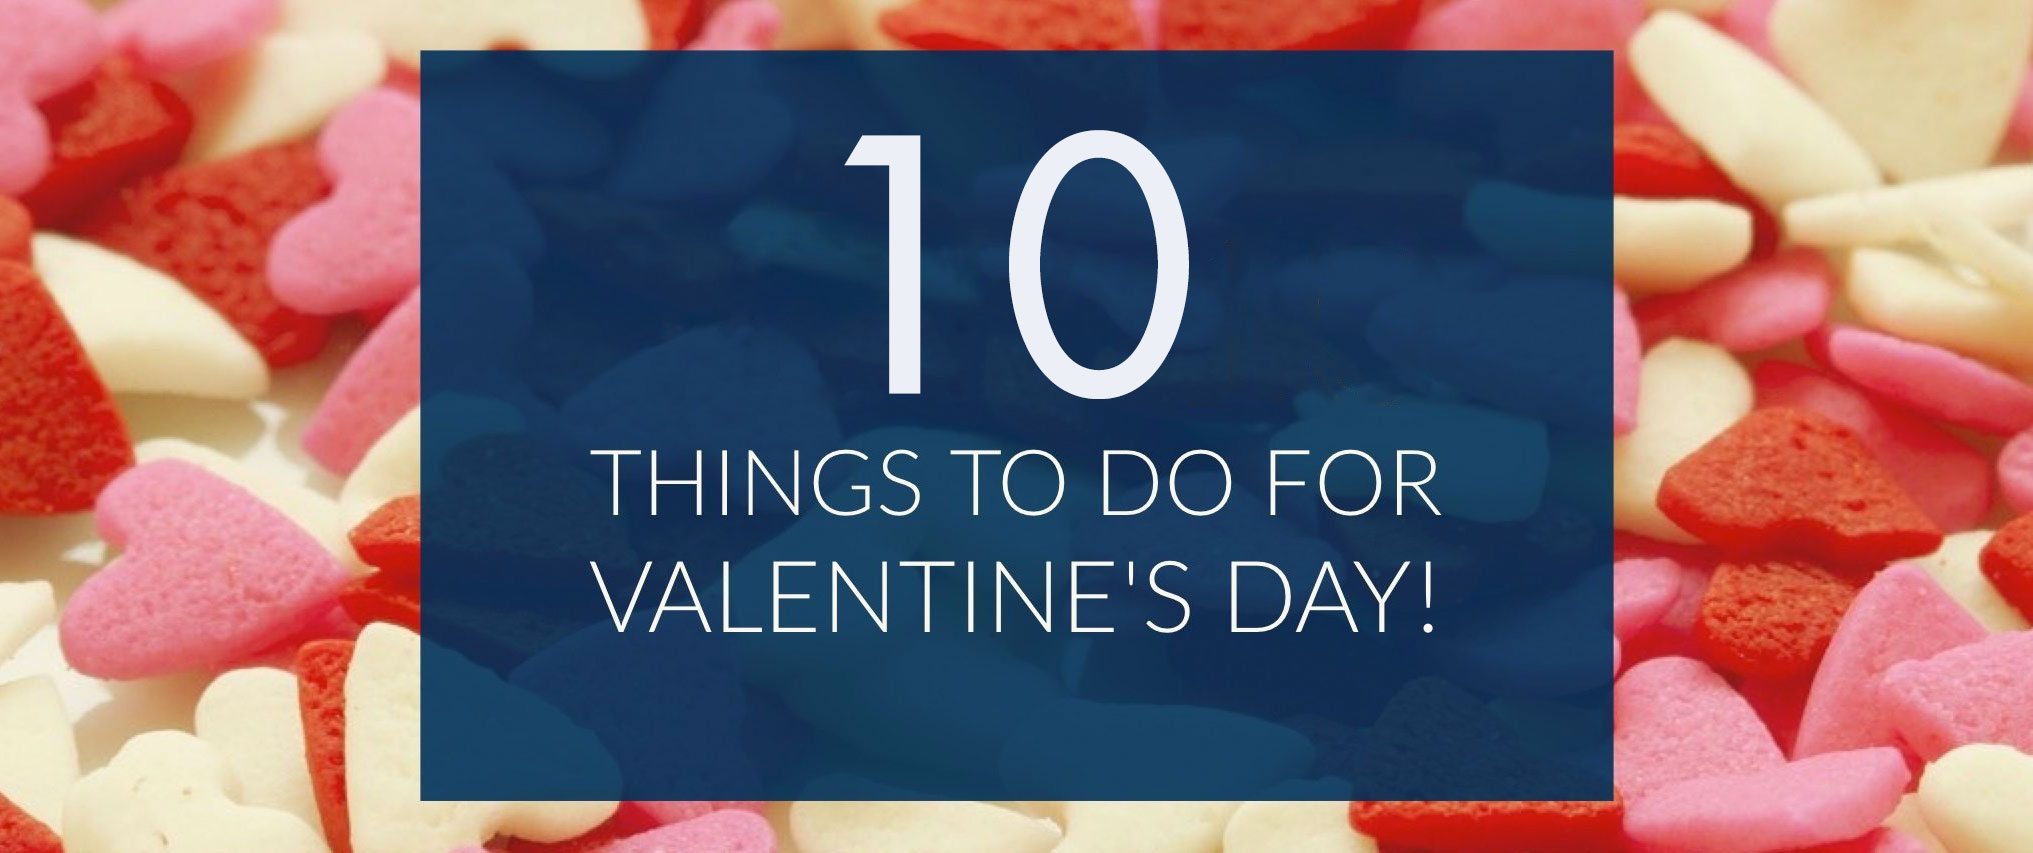 10 Things To Do For Valentine's Day - Charlotte Home Finder